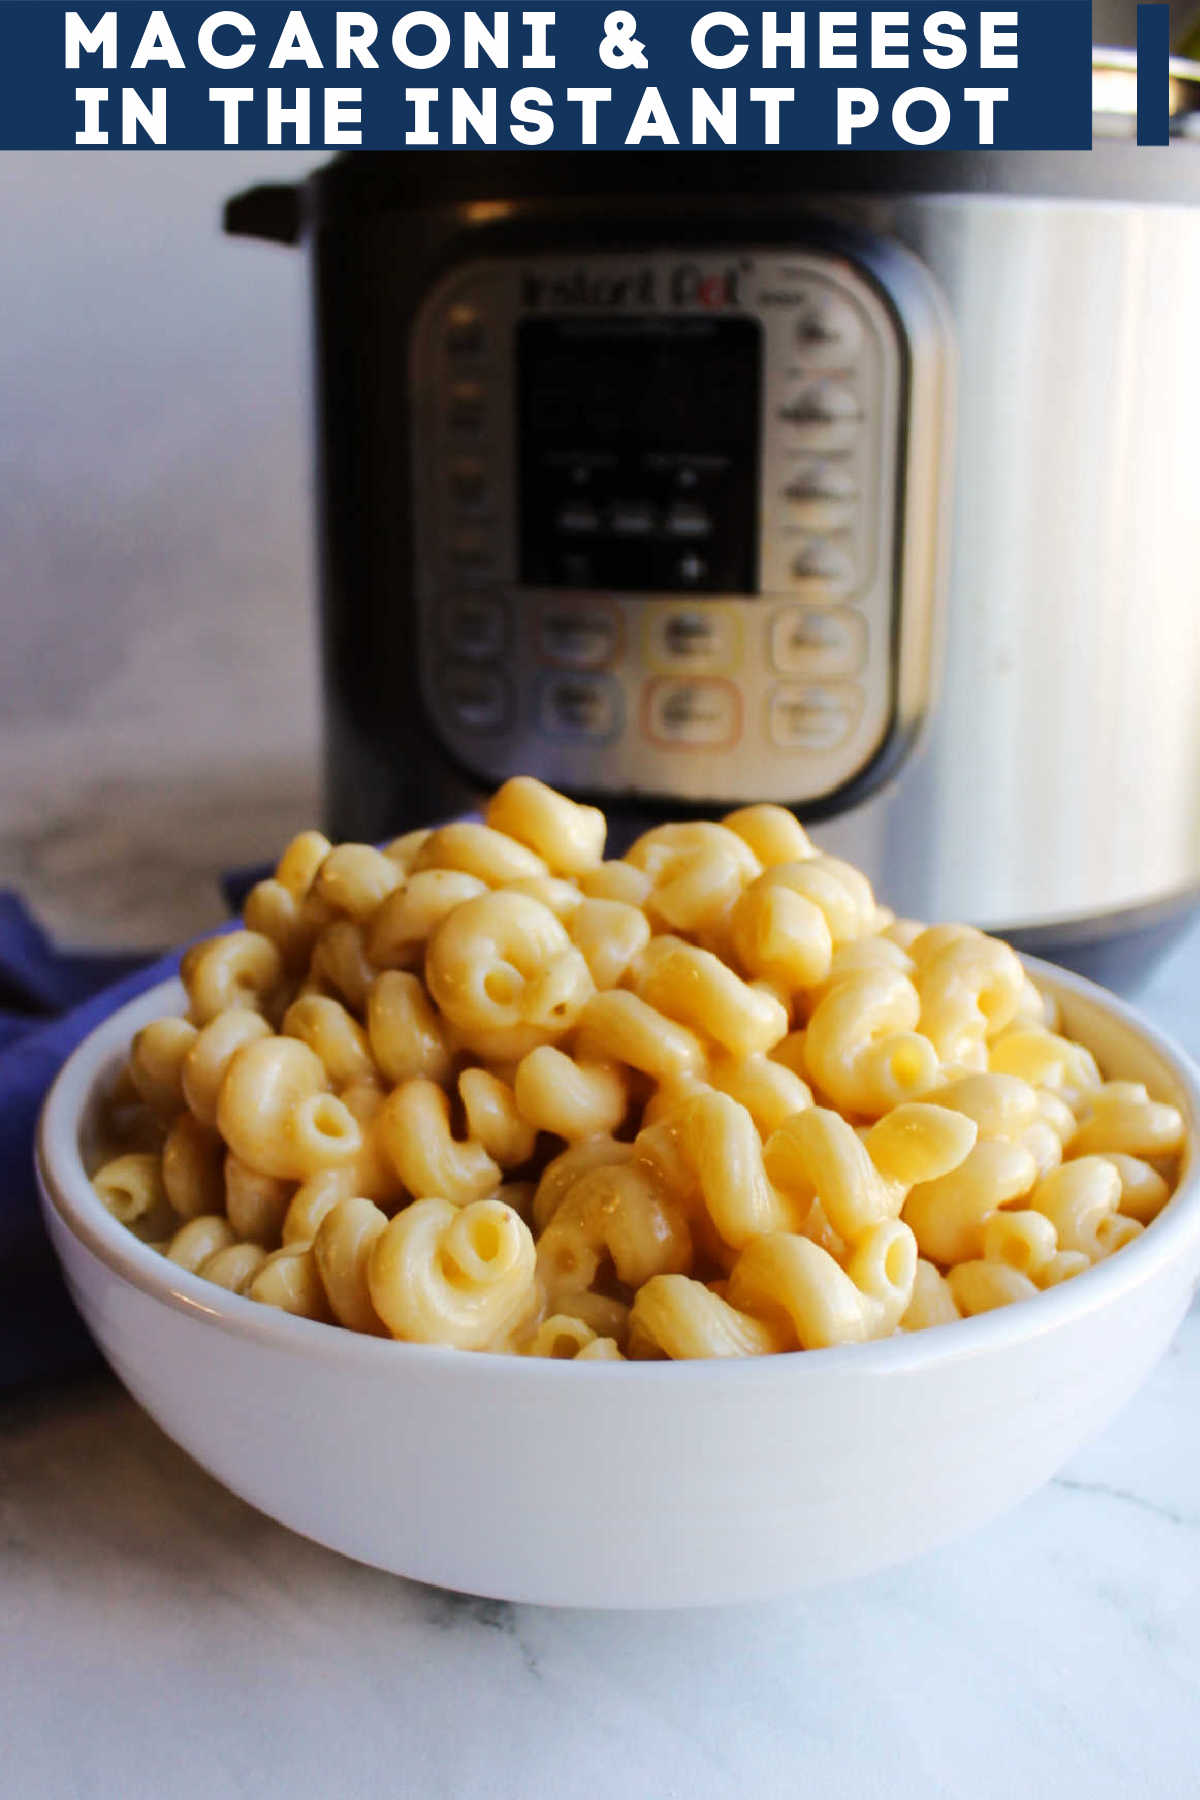 Making super cheesy mac and cheese in the instant pot is so quick and simple. This recipe only requires a few simple ingredients and almost no effort.